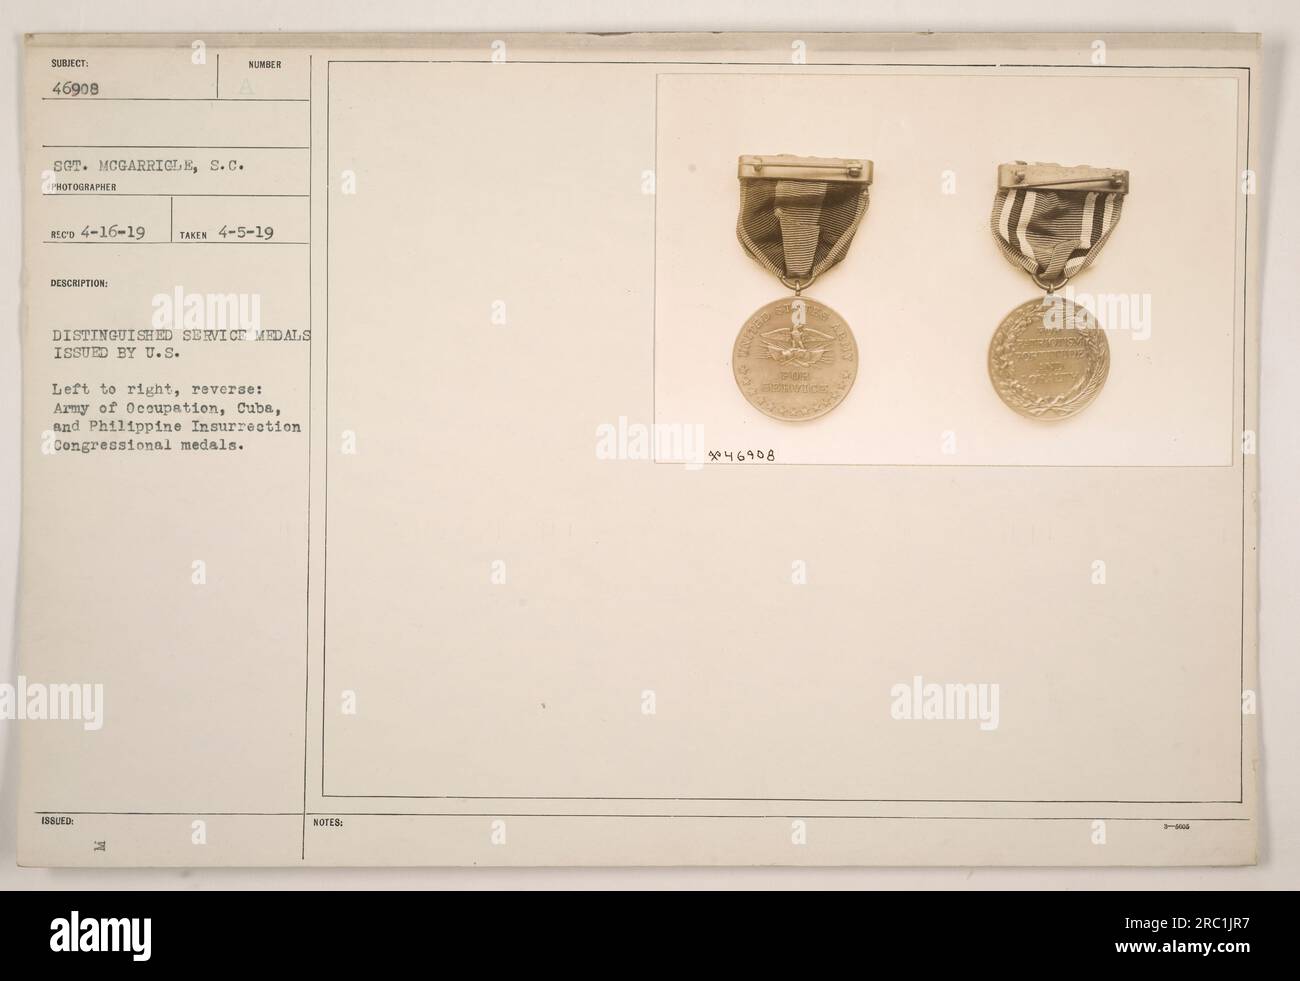 'Awards of 46908 Sgt. McGarricle, S.C., featuring the Distinguished Service Medals issued by the U.S. on April 5, 1919. From left to right, the reverse sides display the Army of Occupation, Cuba, and the Philippine Insurrection Congressional medals. Photo taken by Red on April 16, 1919.' Stock Photo